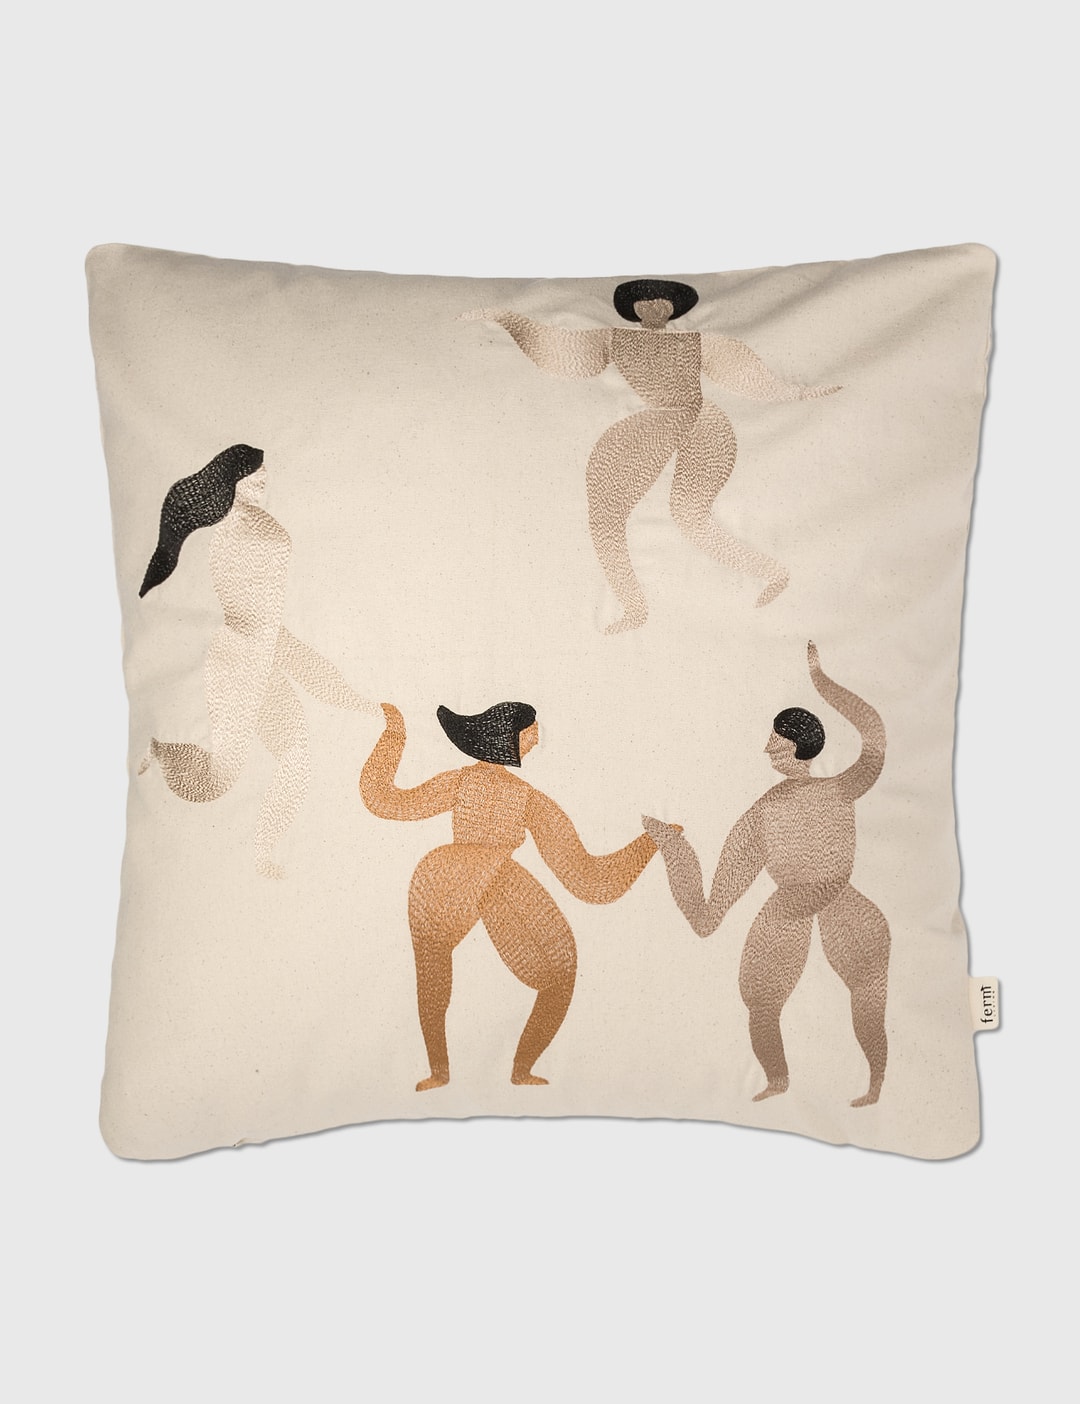 scheiden getrouwd Koloniaal Ferm Living - Free Cushion | HBX - Globally Curated Fashion and Lifestyle  by Hypebeast